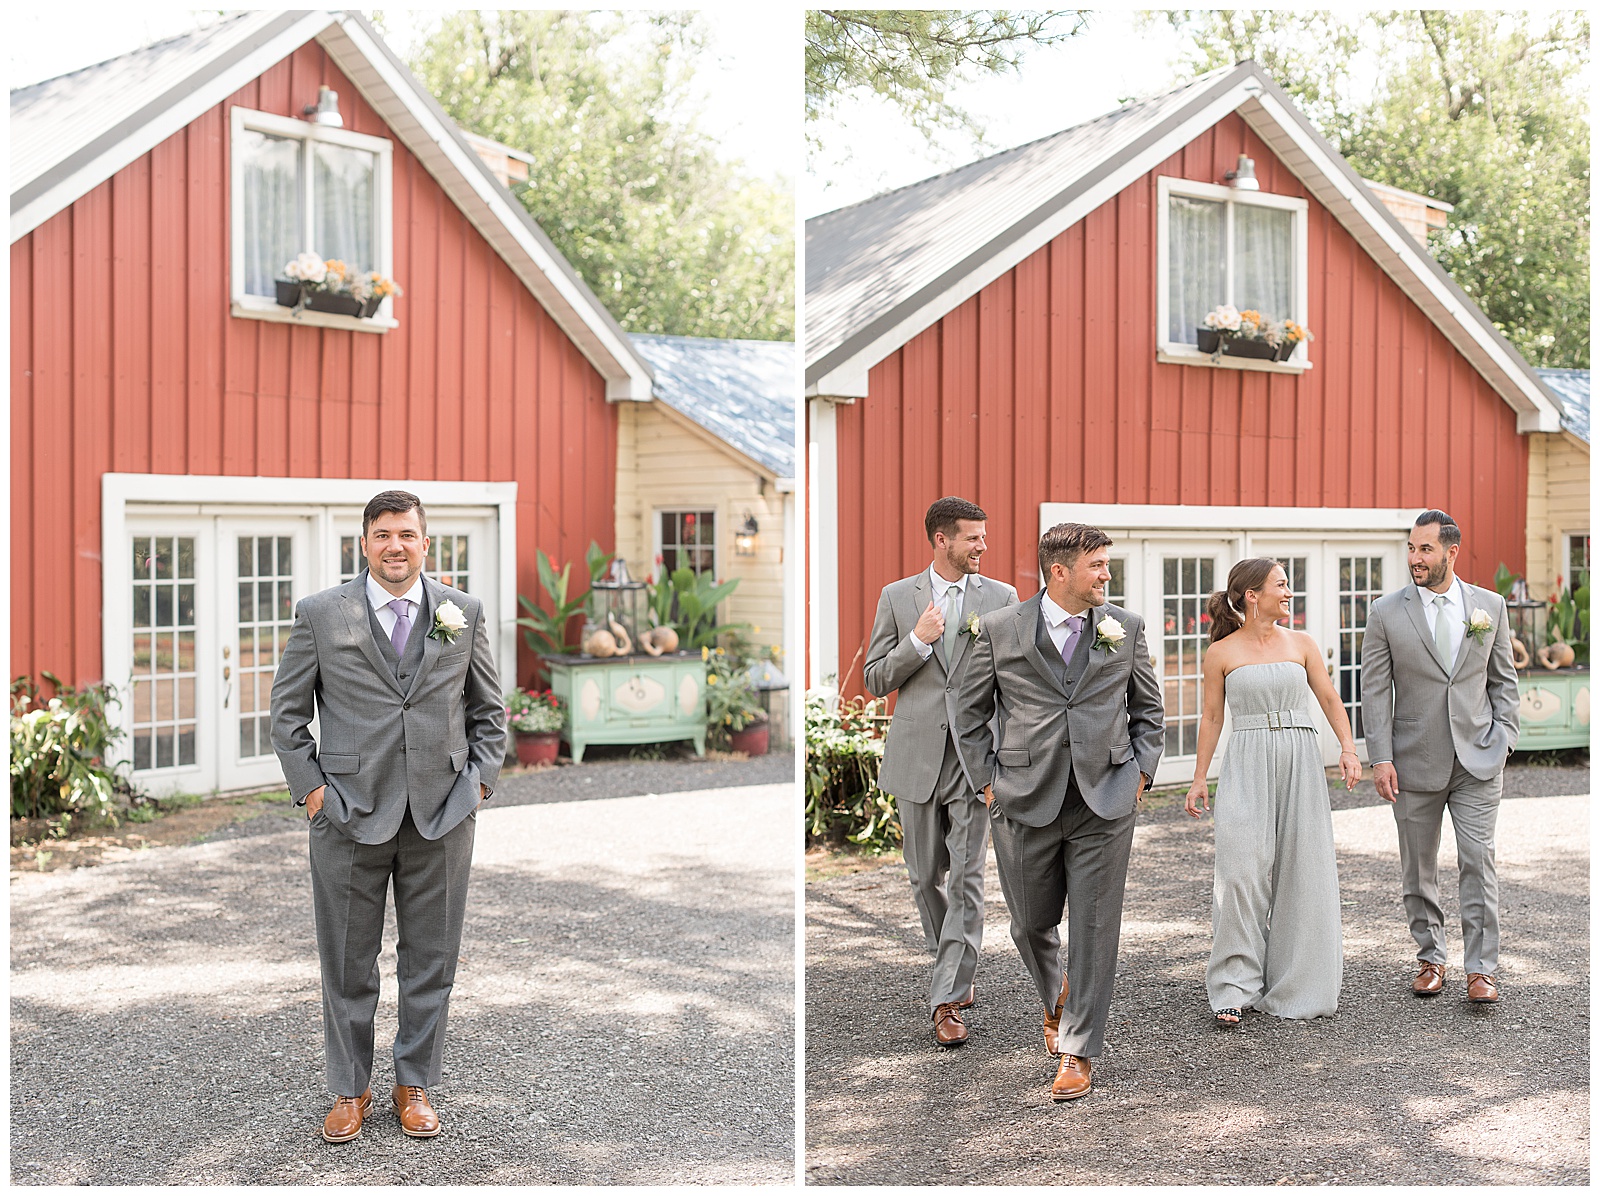 groomsmen photos with them walking and smiling together